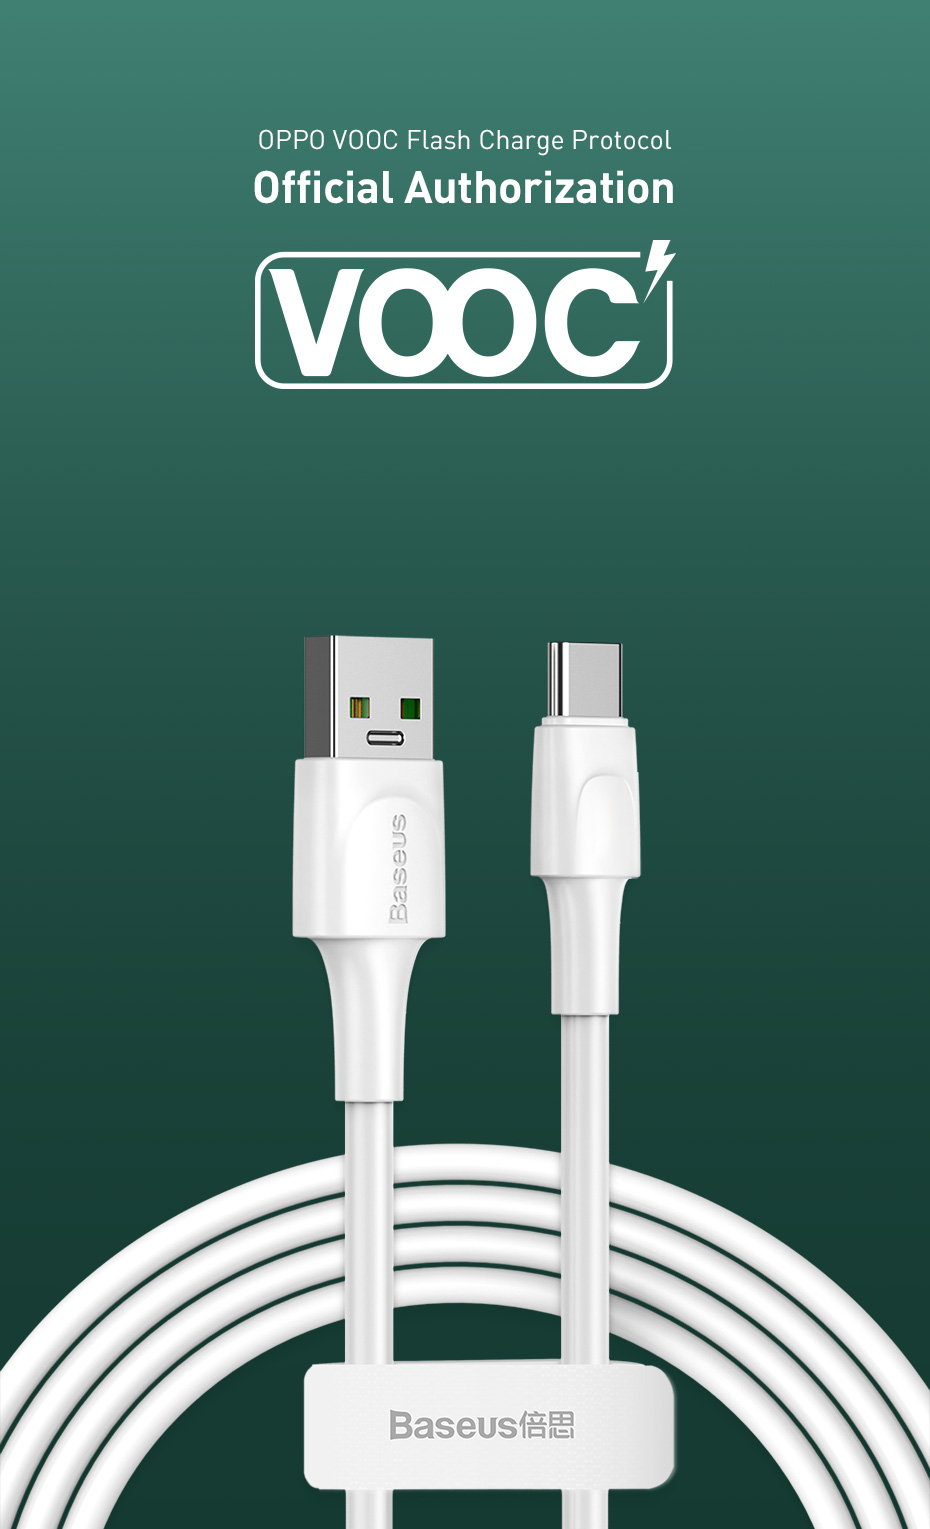 Baseus-5A-Warp-OPPO-VOOC-Certified-USB-Type-C-Cable-Fast-Charging-Data-Sync-Cord-Line-Support-AFCQCF-1706996-1